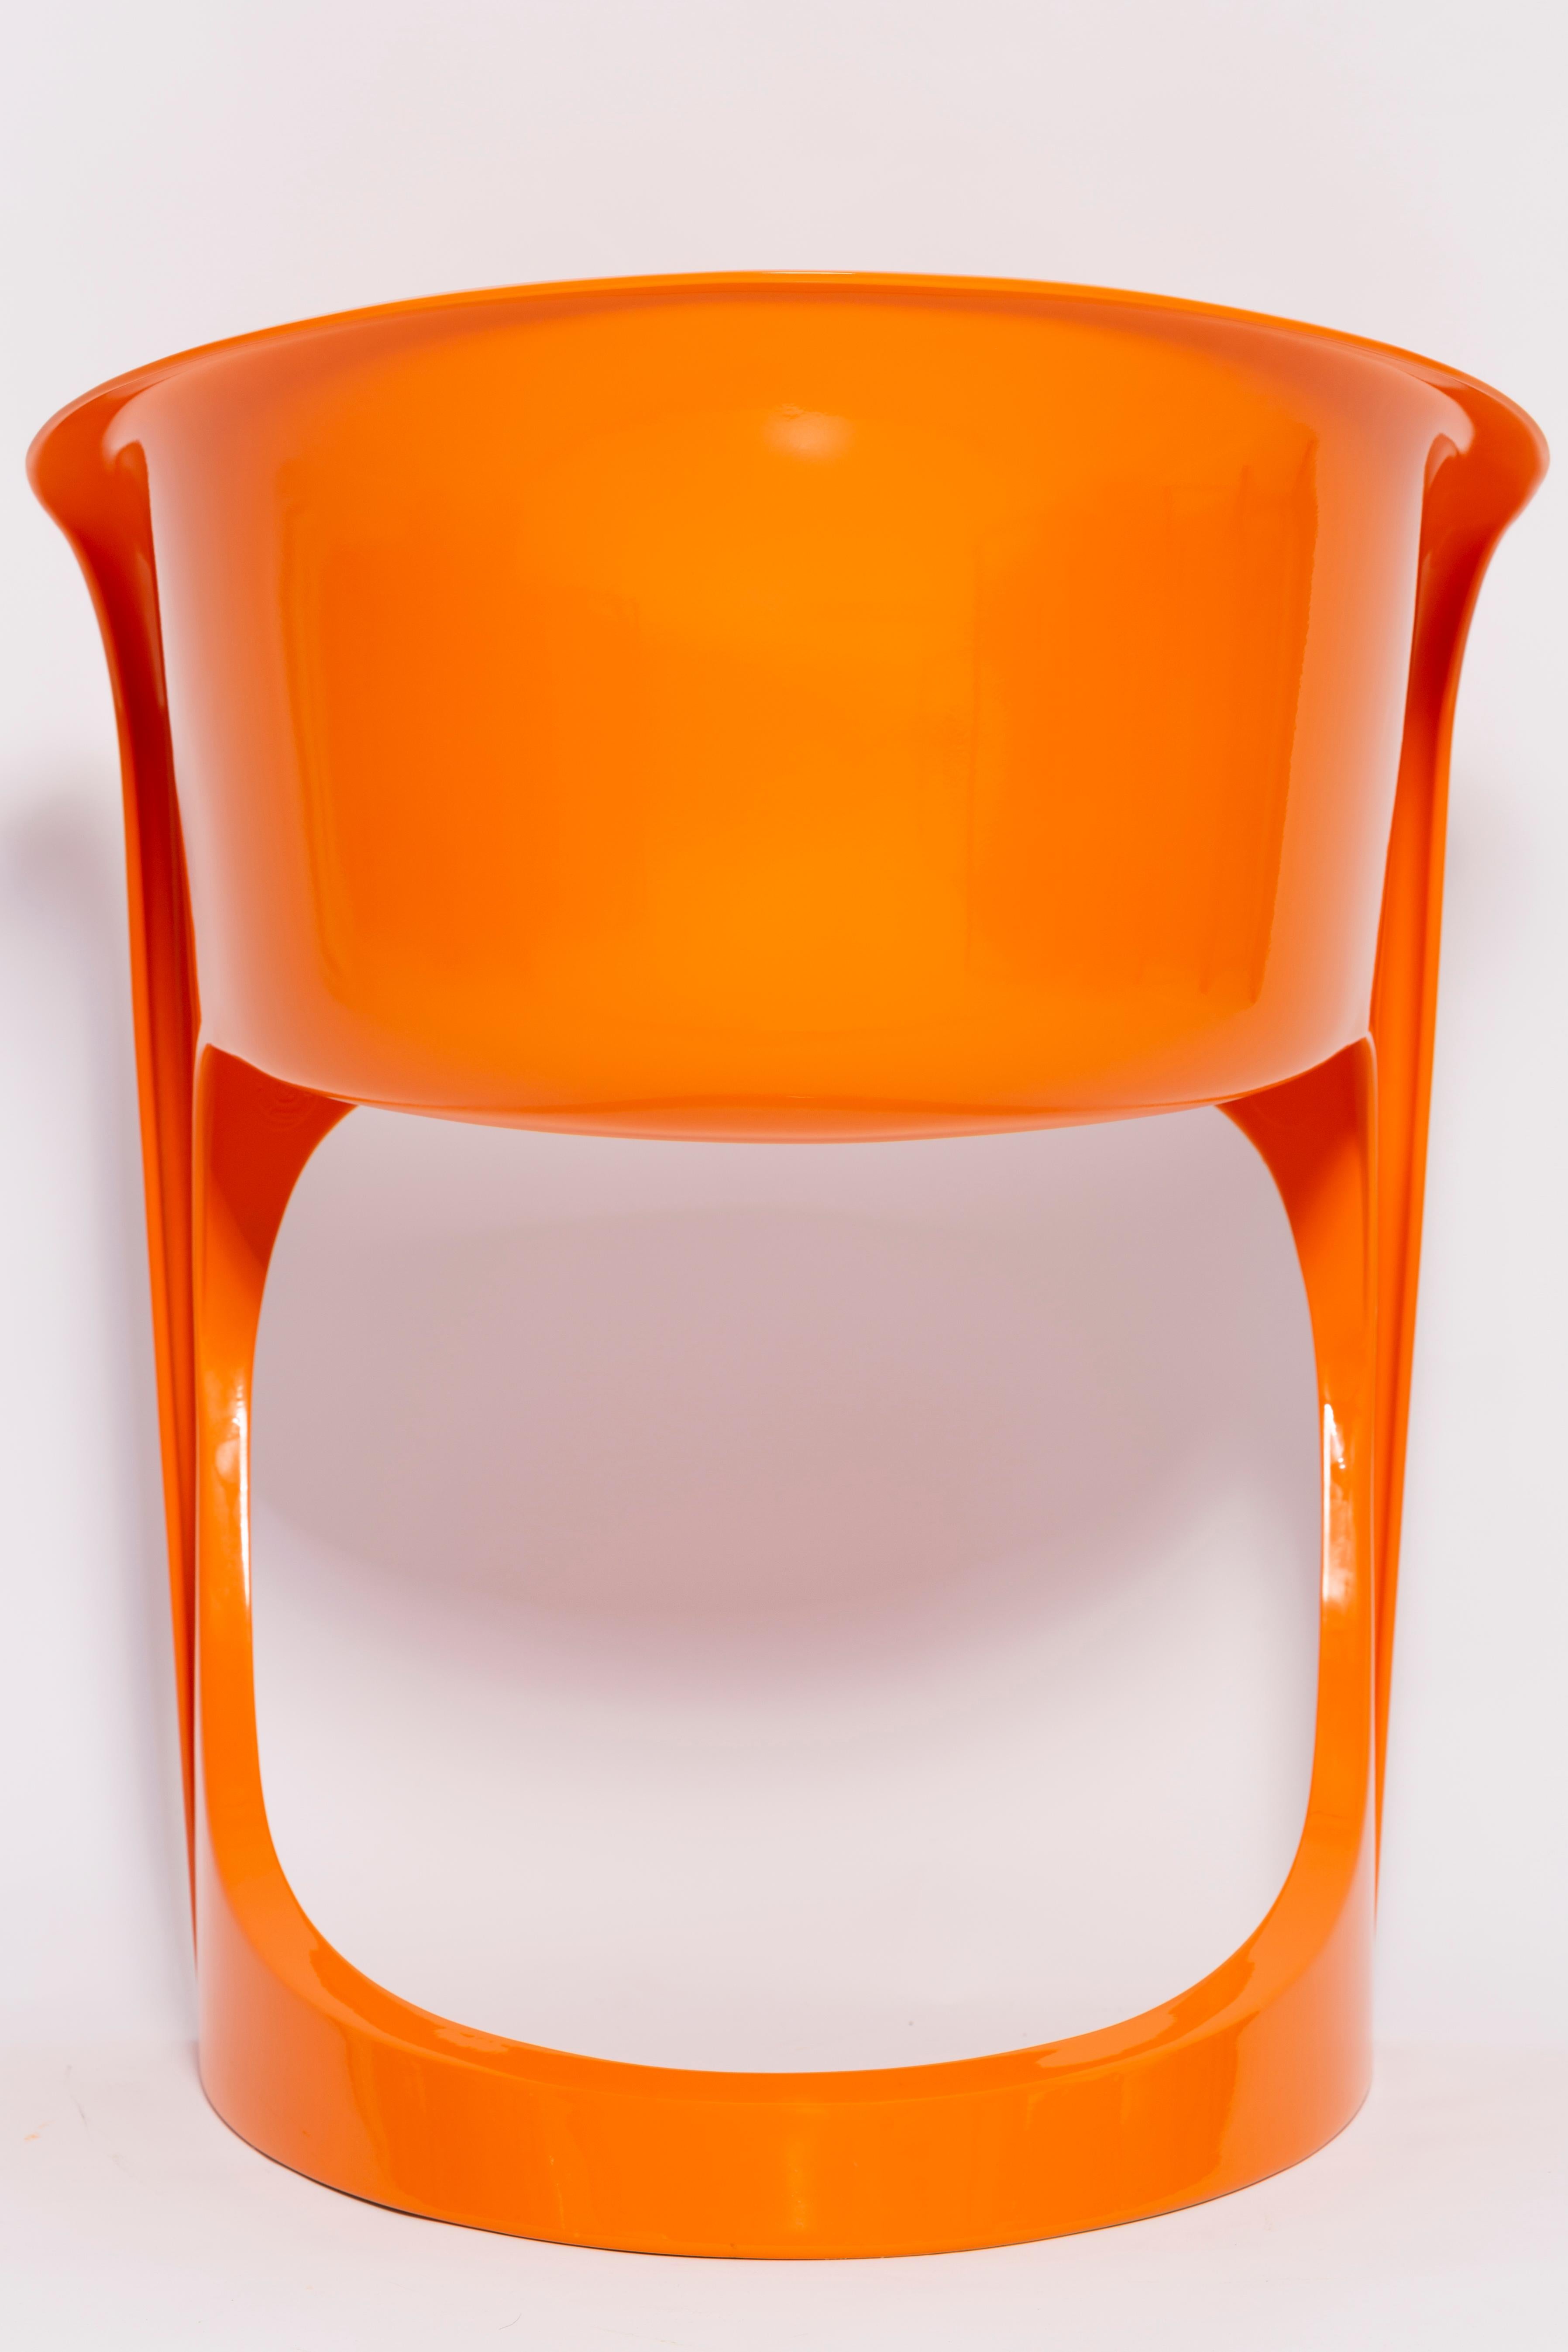 Set of Six Glossy Orange Cado Chairs, Steen Østergaard, 1974 For Sale 1